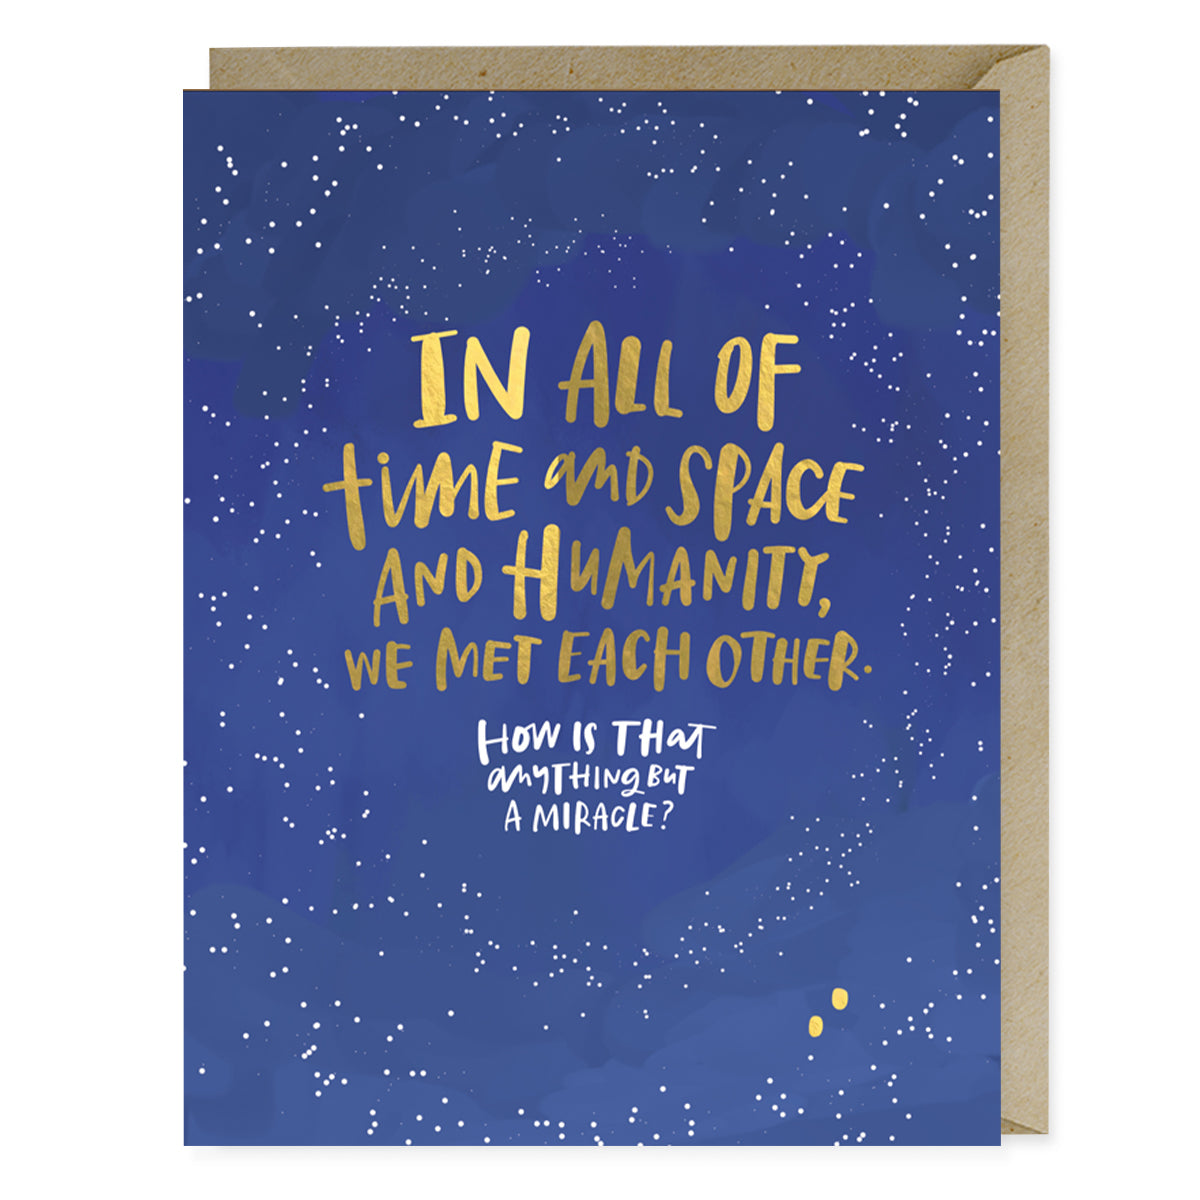 Met Each Other Miracle  - Greeting Card